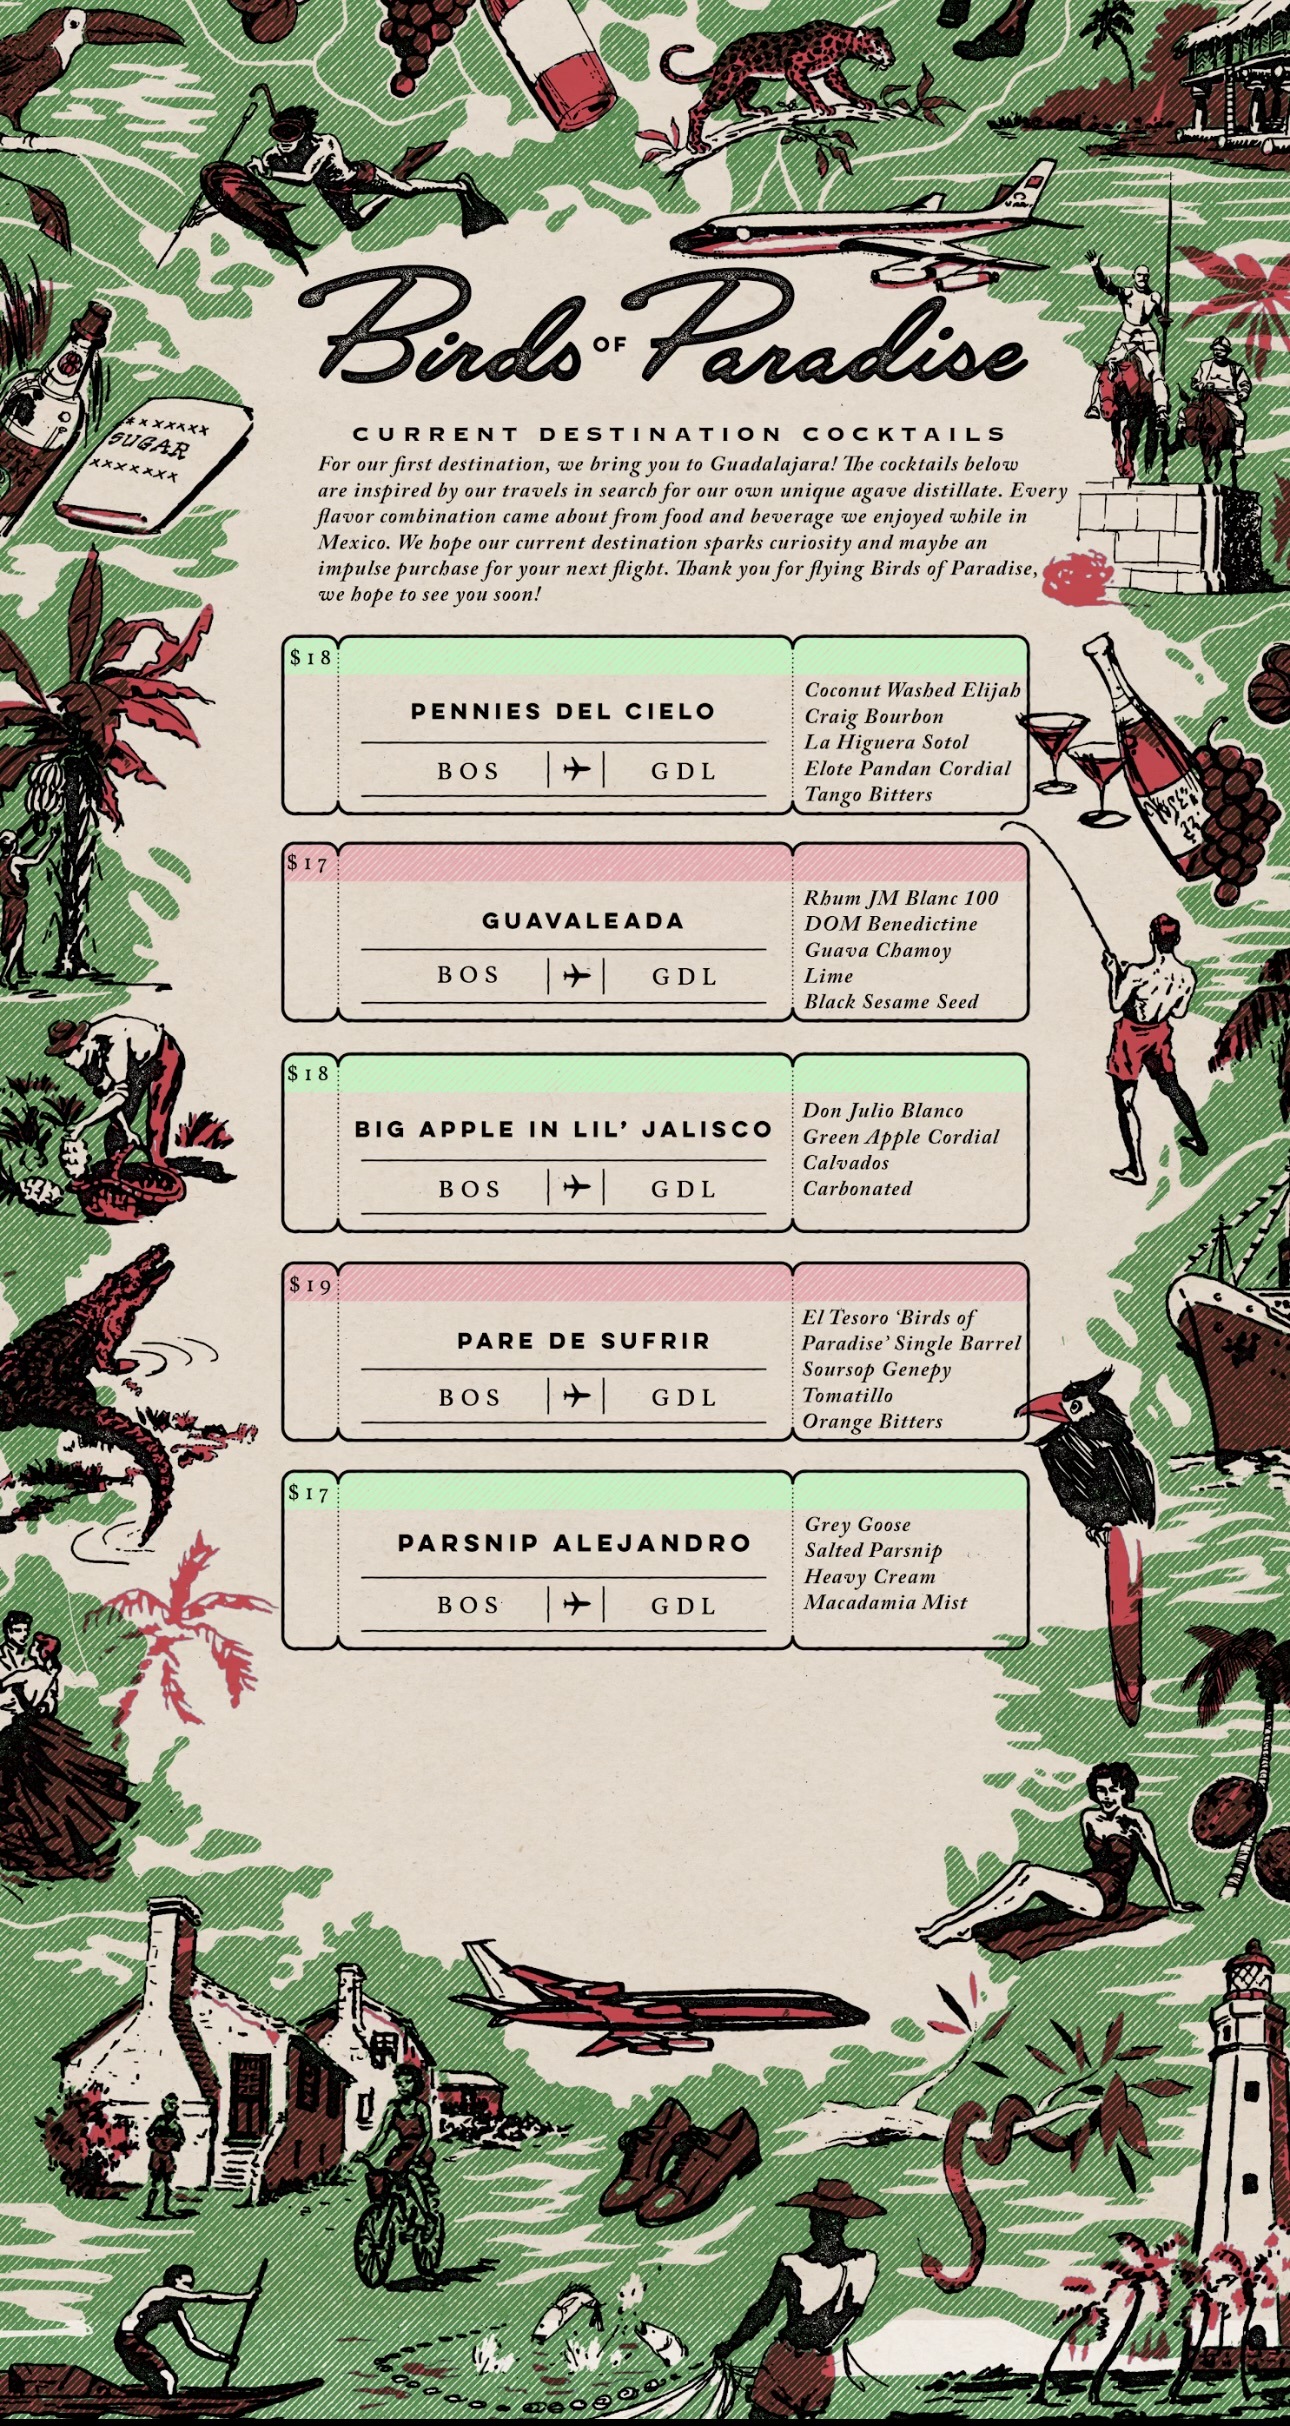 A cocktail menu with a green and red color scheme is decorated with illustrations evoking vintage travel vibes.